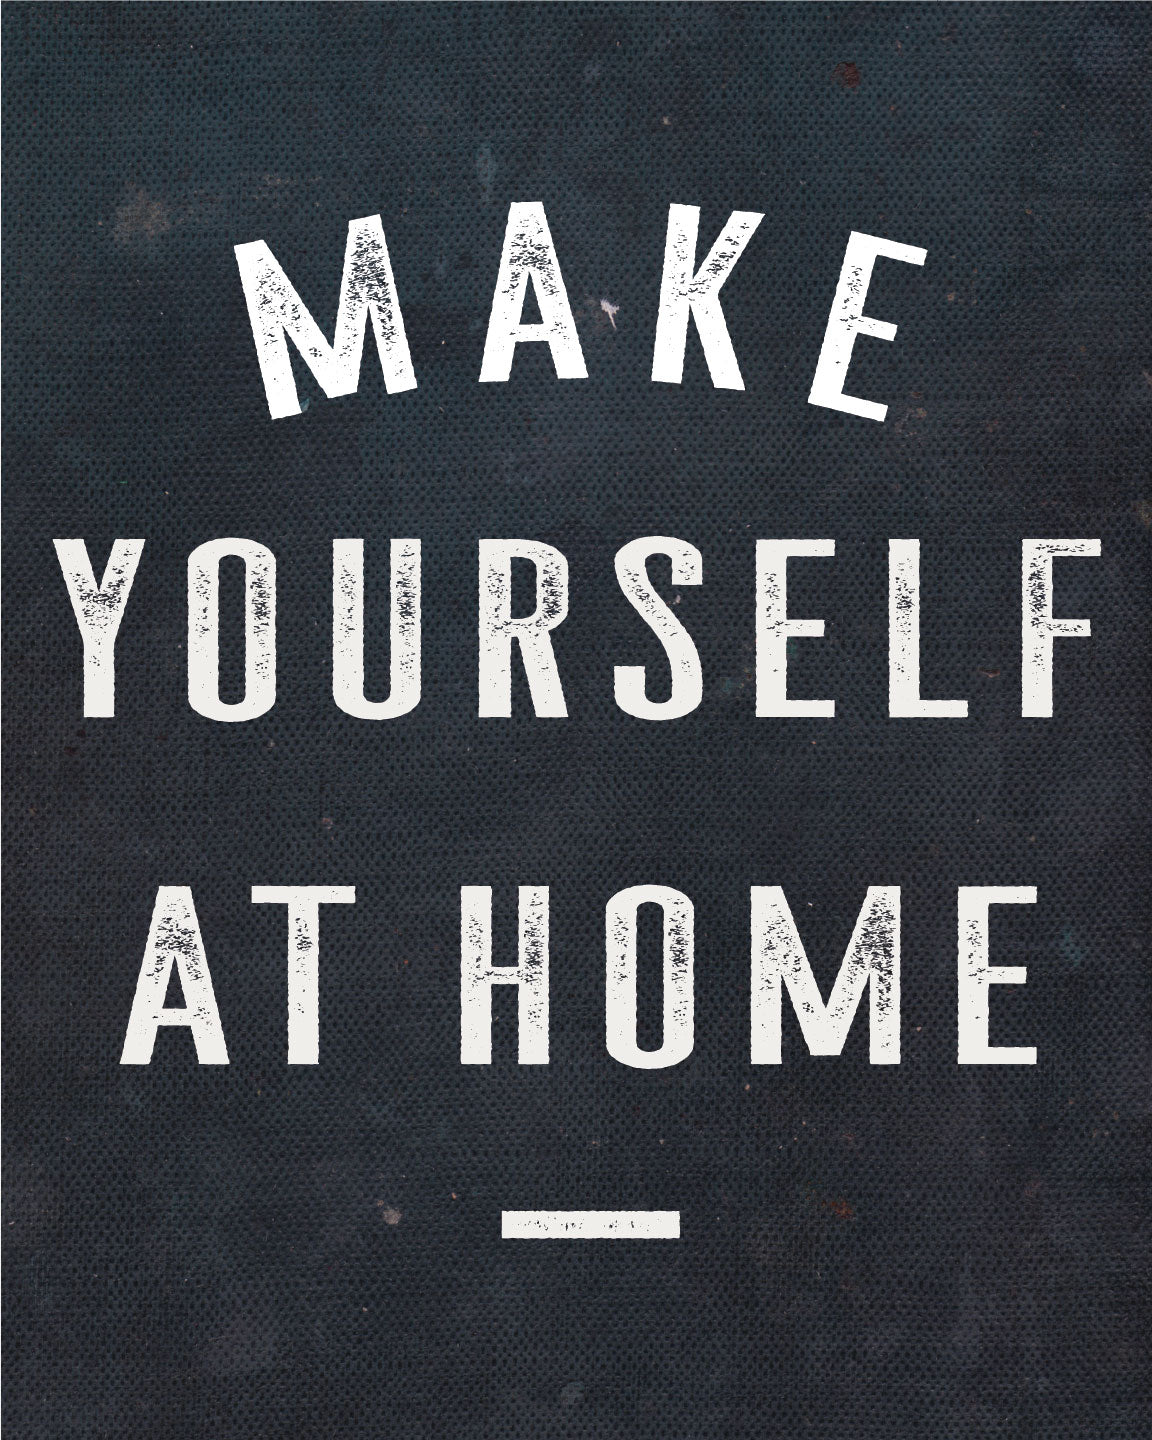 Make Yourself At Home Art Print- Ink